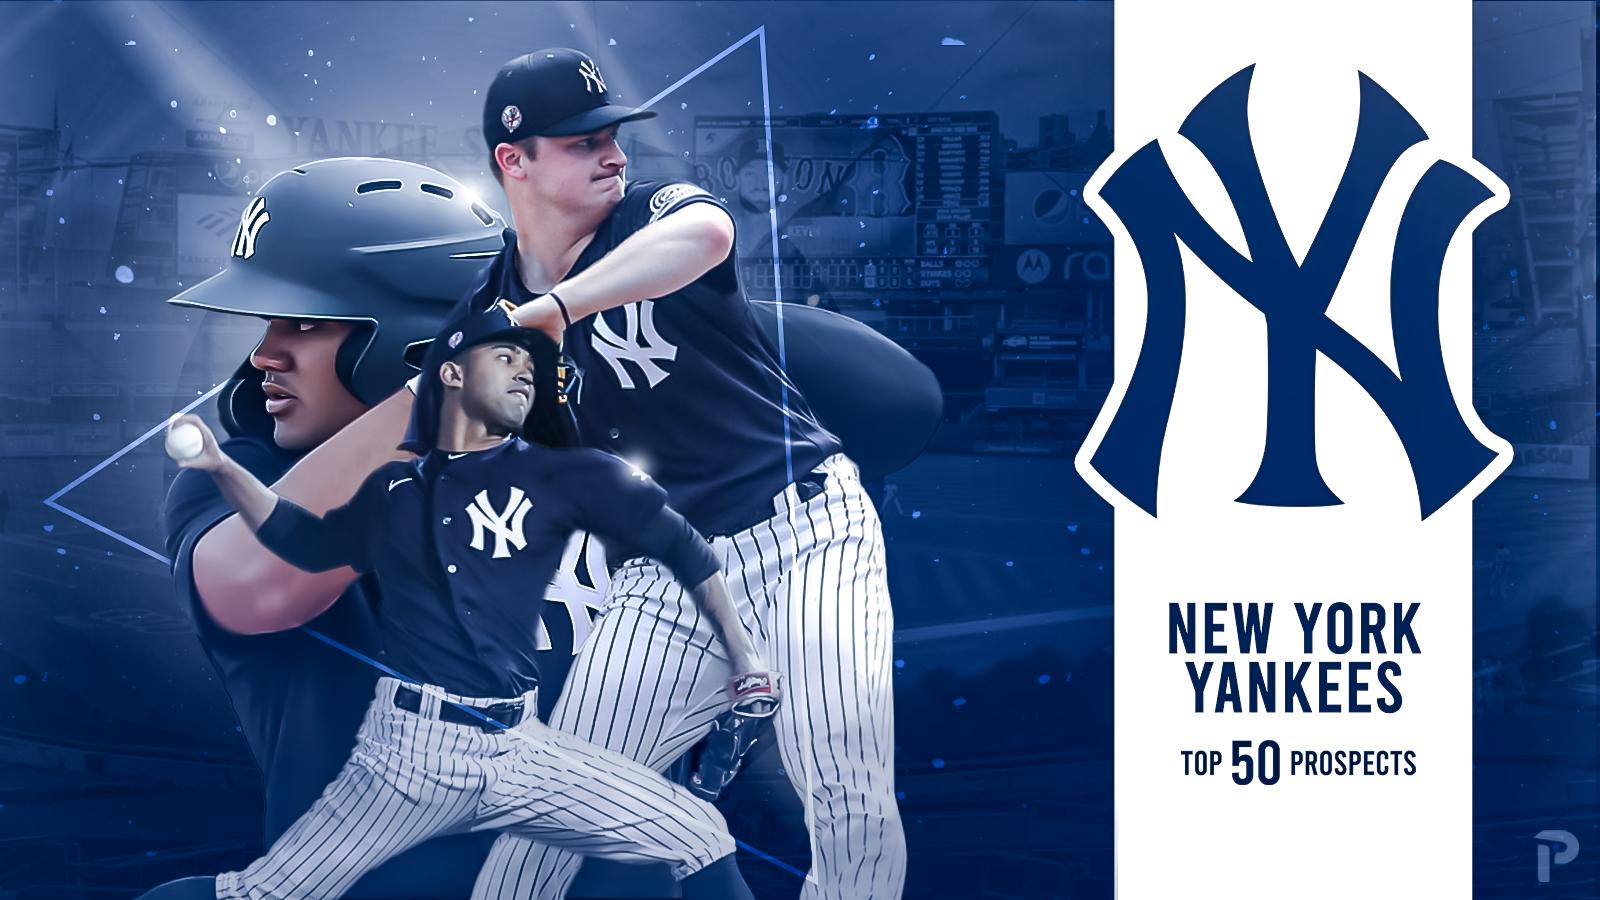 It's up to you New York — Yankees to get healthy